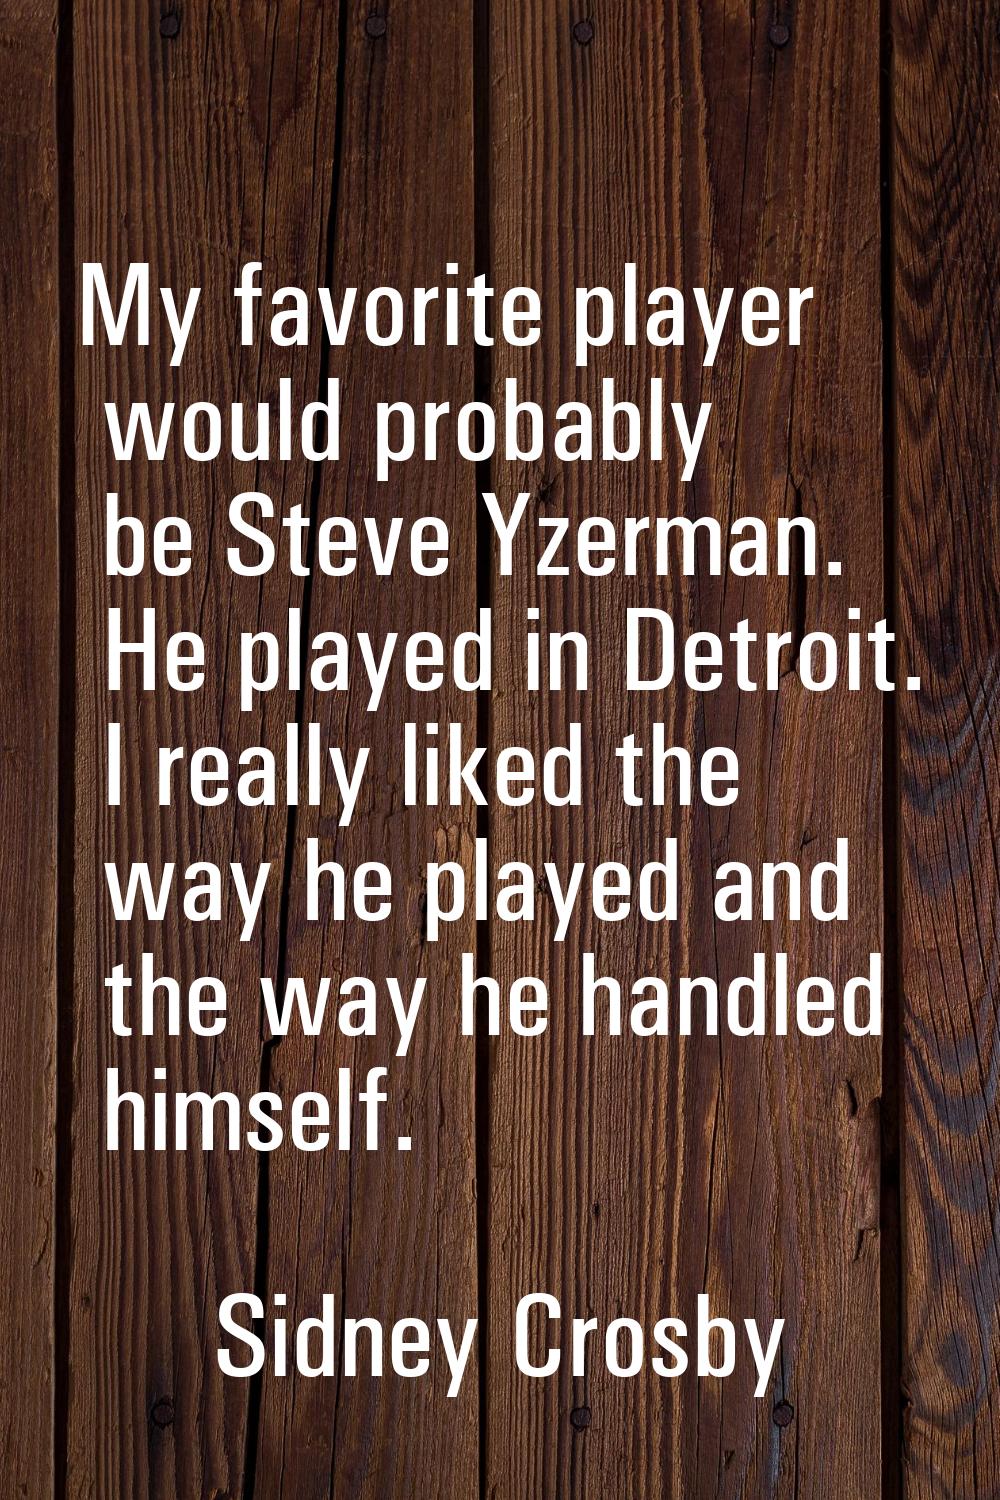 My favorite player would probably be Steve Yzerman. He played in Detroit. I really liked the way he